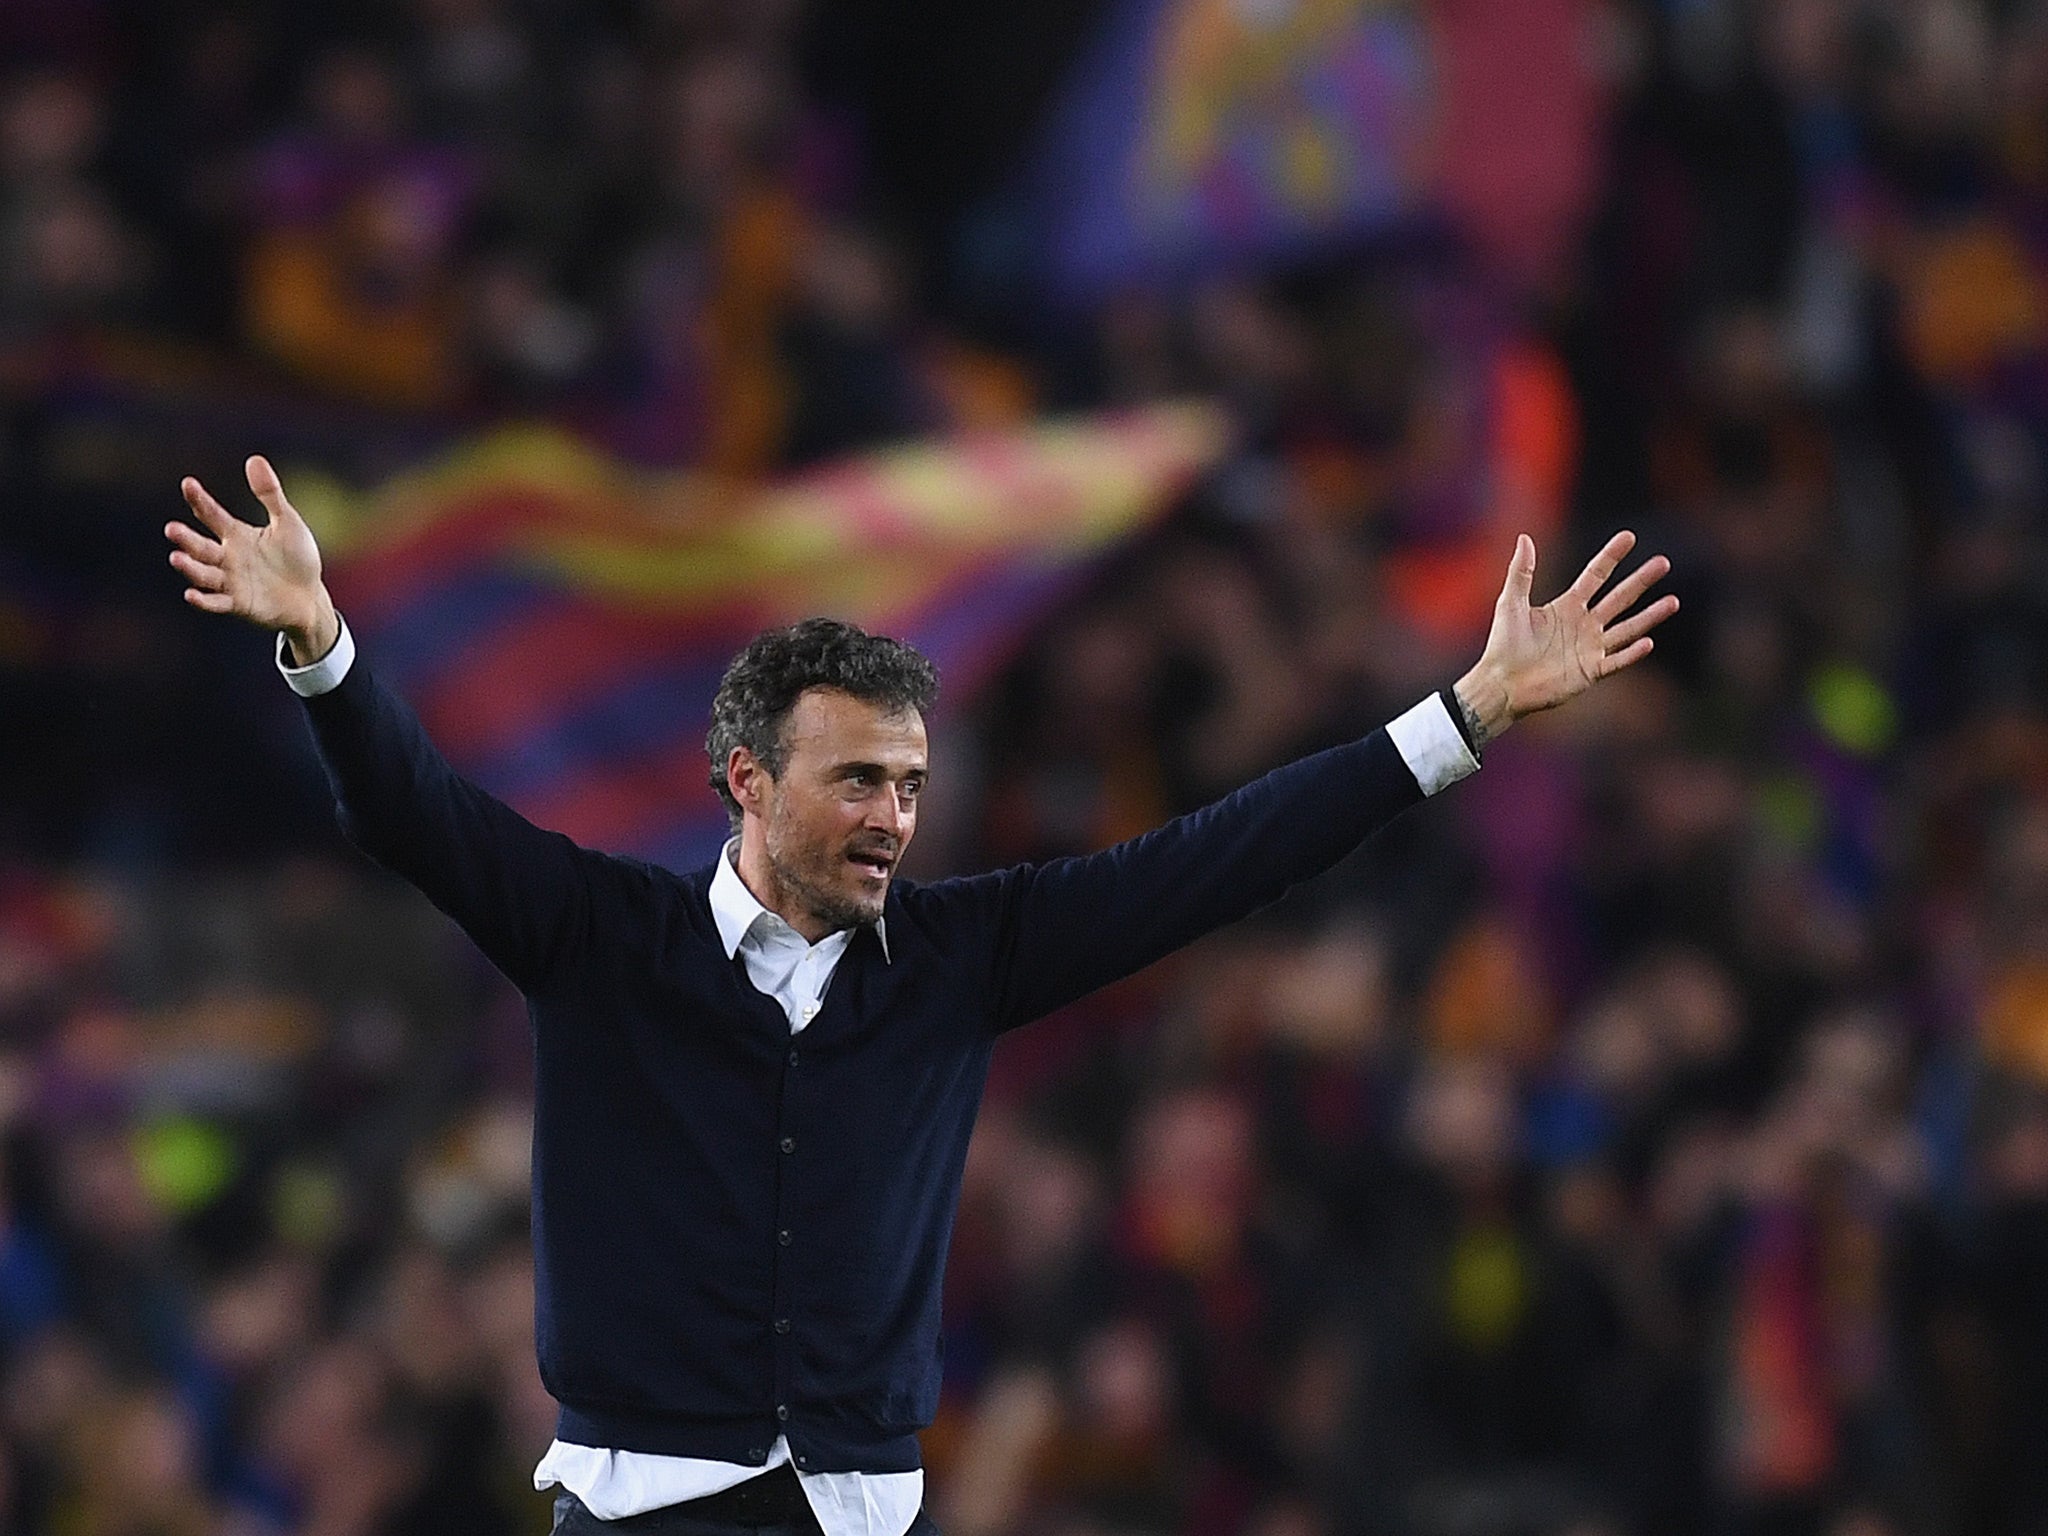 Luis Enrique deserves credit for the way he turned this tie around